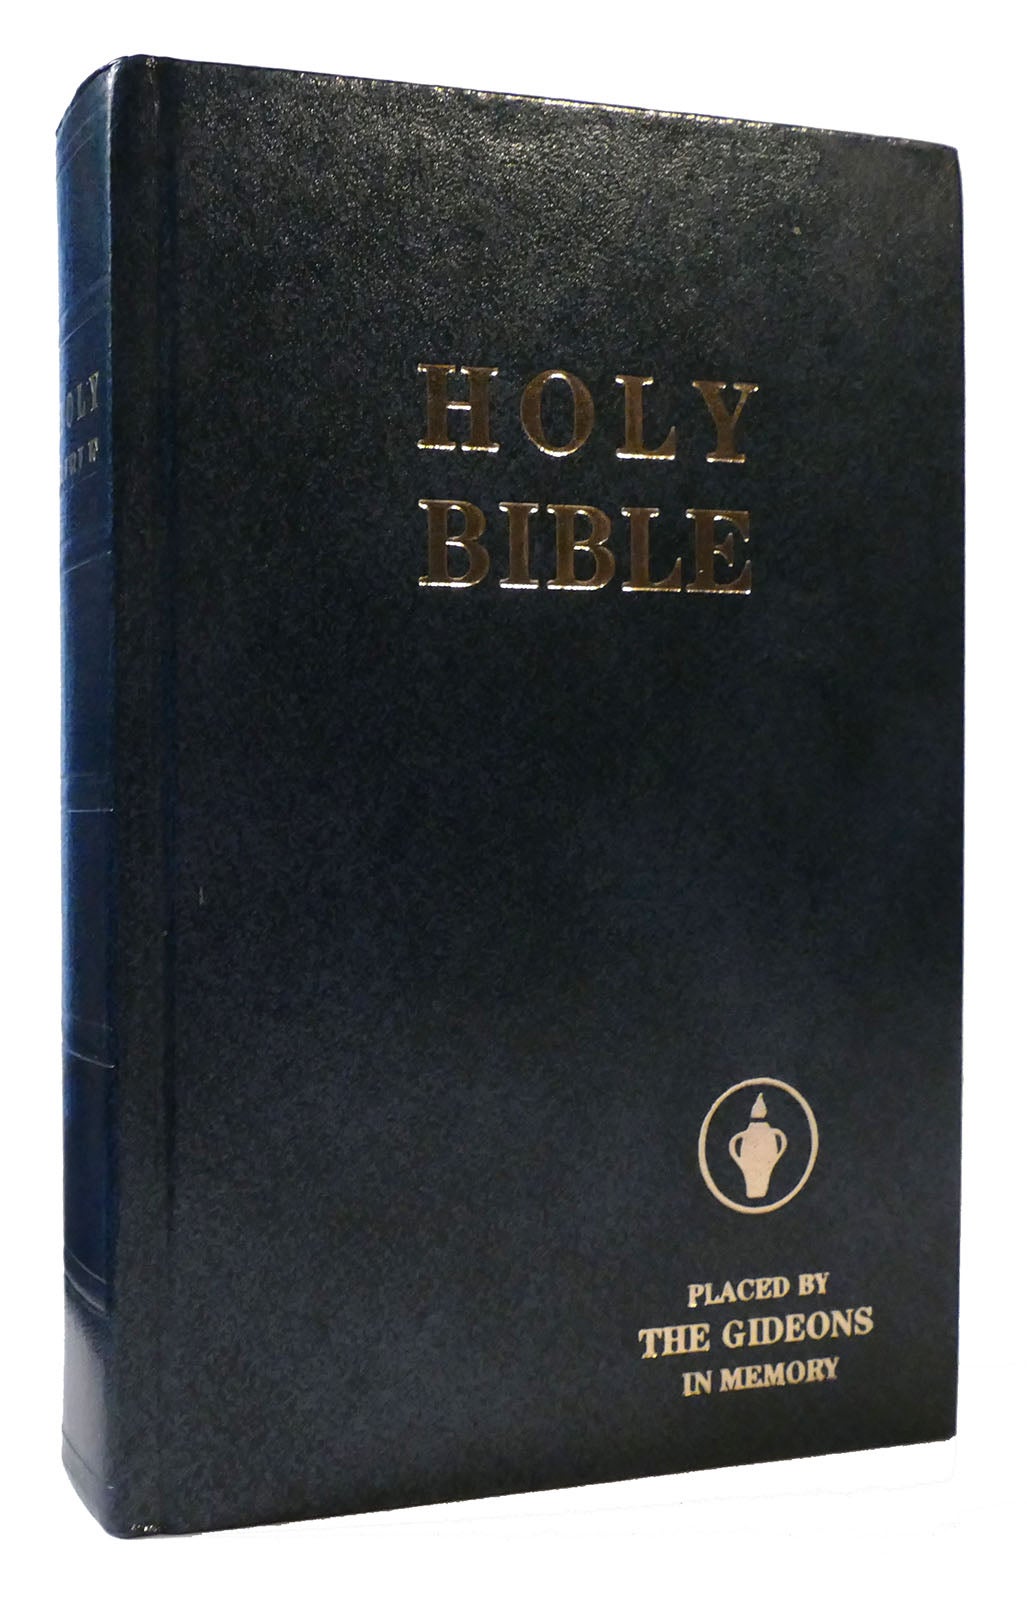 THE HOLY BIBLE CONTAINING THE OLD AND NEW TESTAMENTS | The Gideons ...